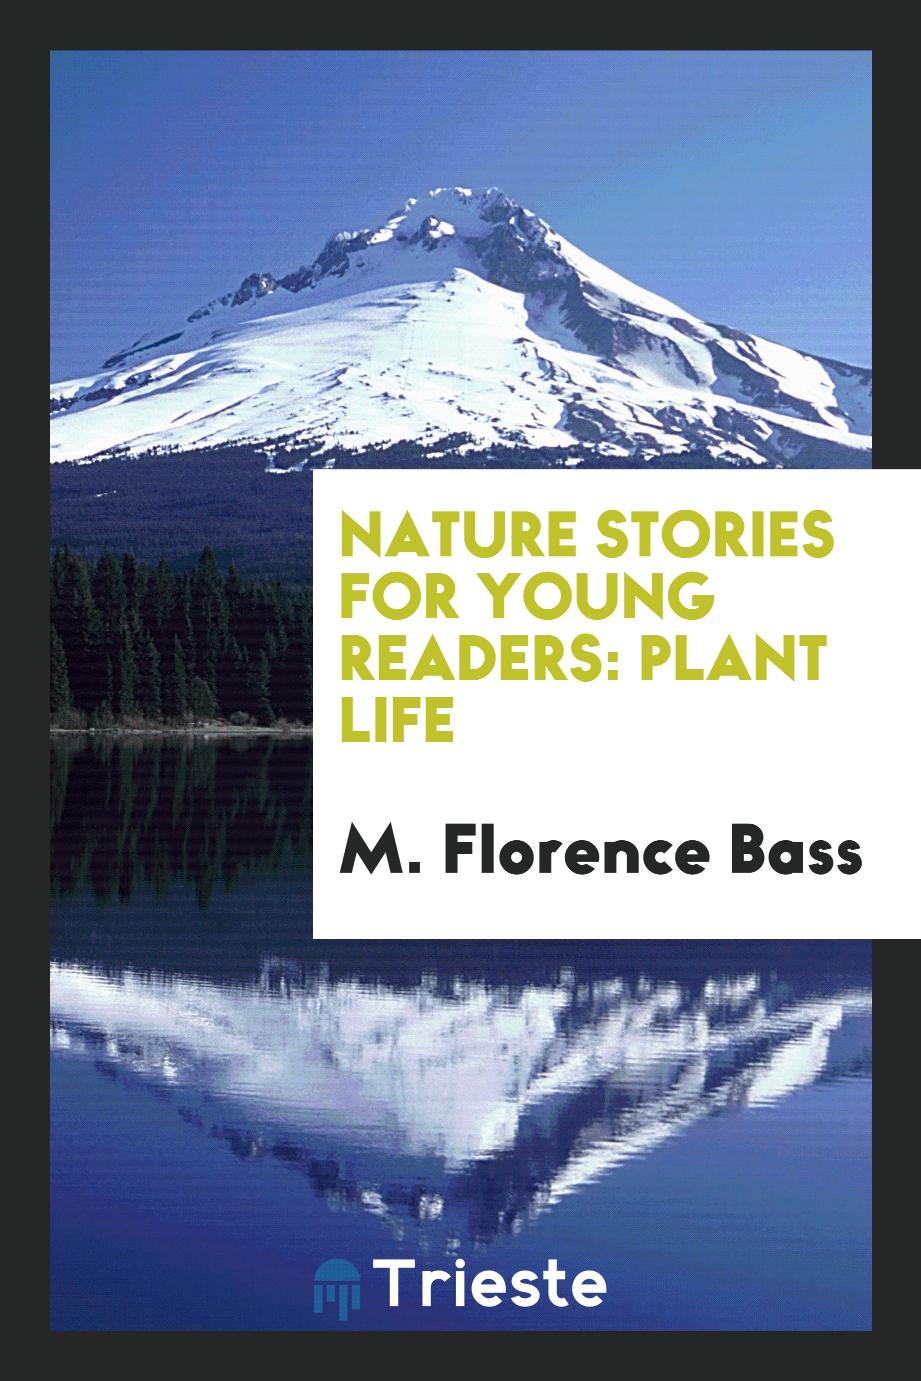 Nature Stories for Young Readers: Plant Life